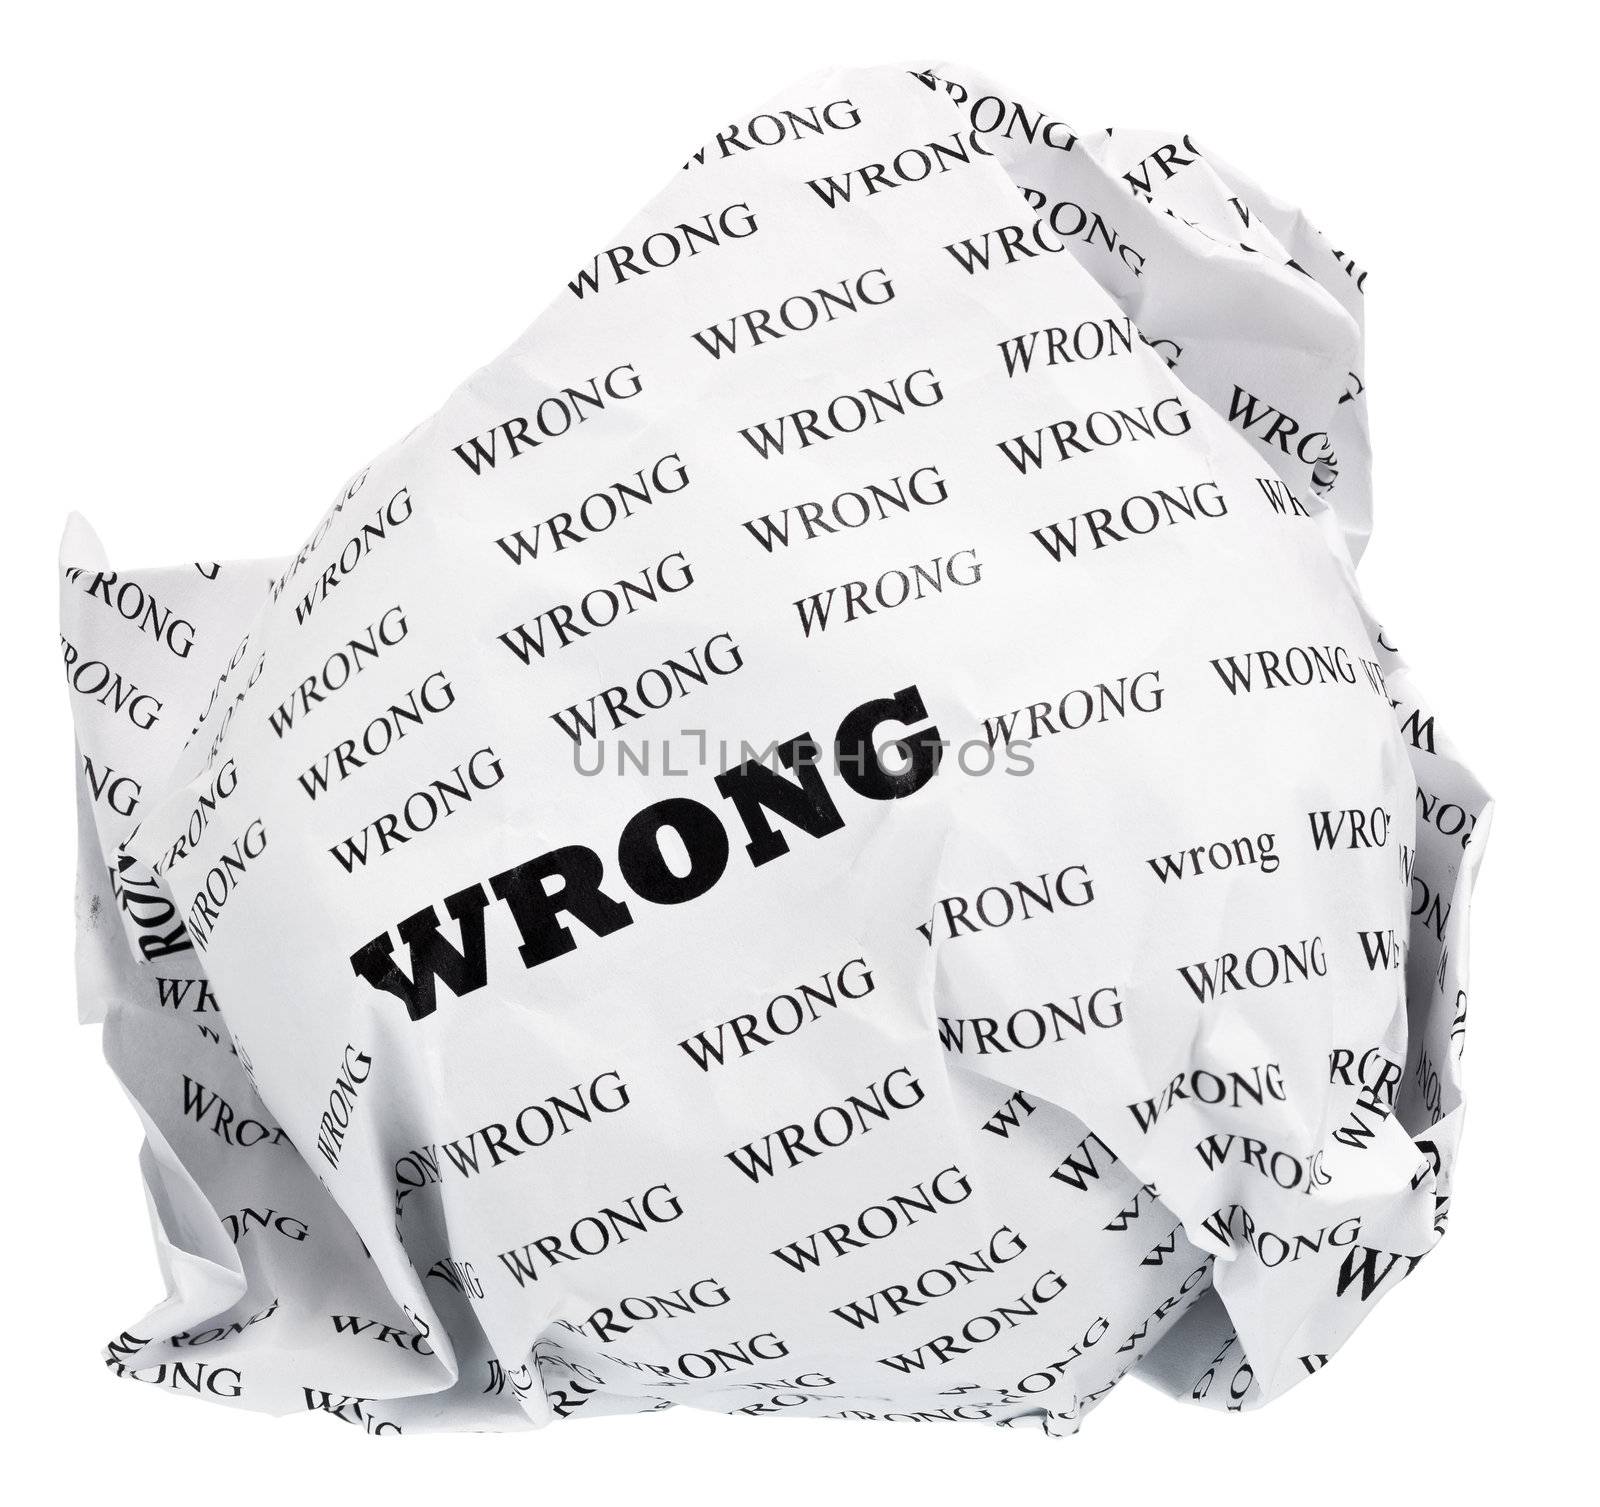 ball of crumpled paper with conceptual text. Isolated with clipping path, expanding the zone of focus achieved by picking out a few photos